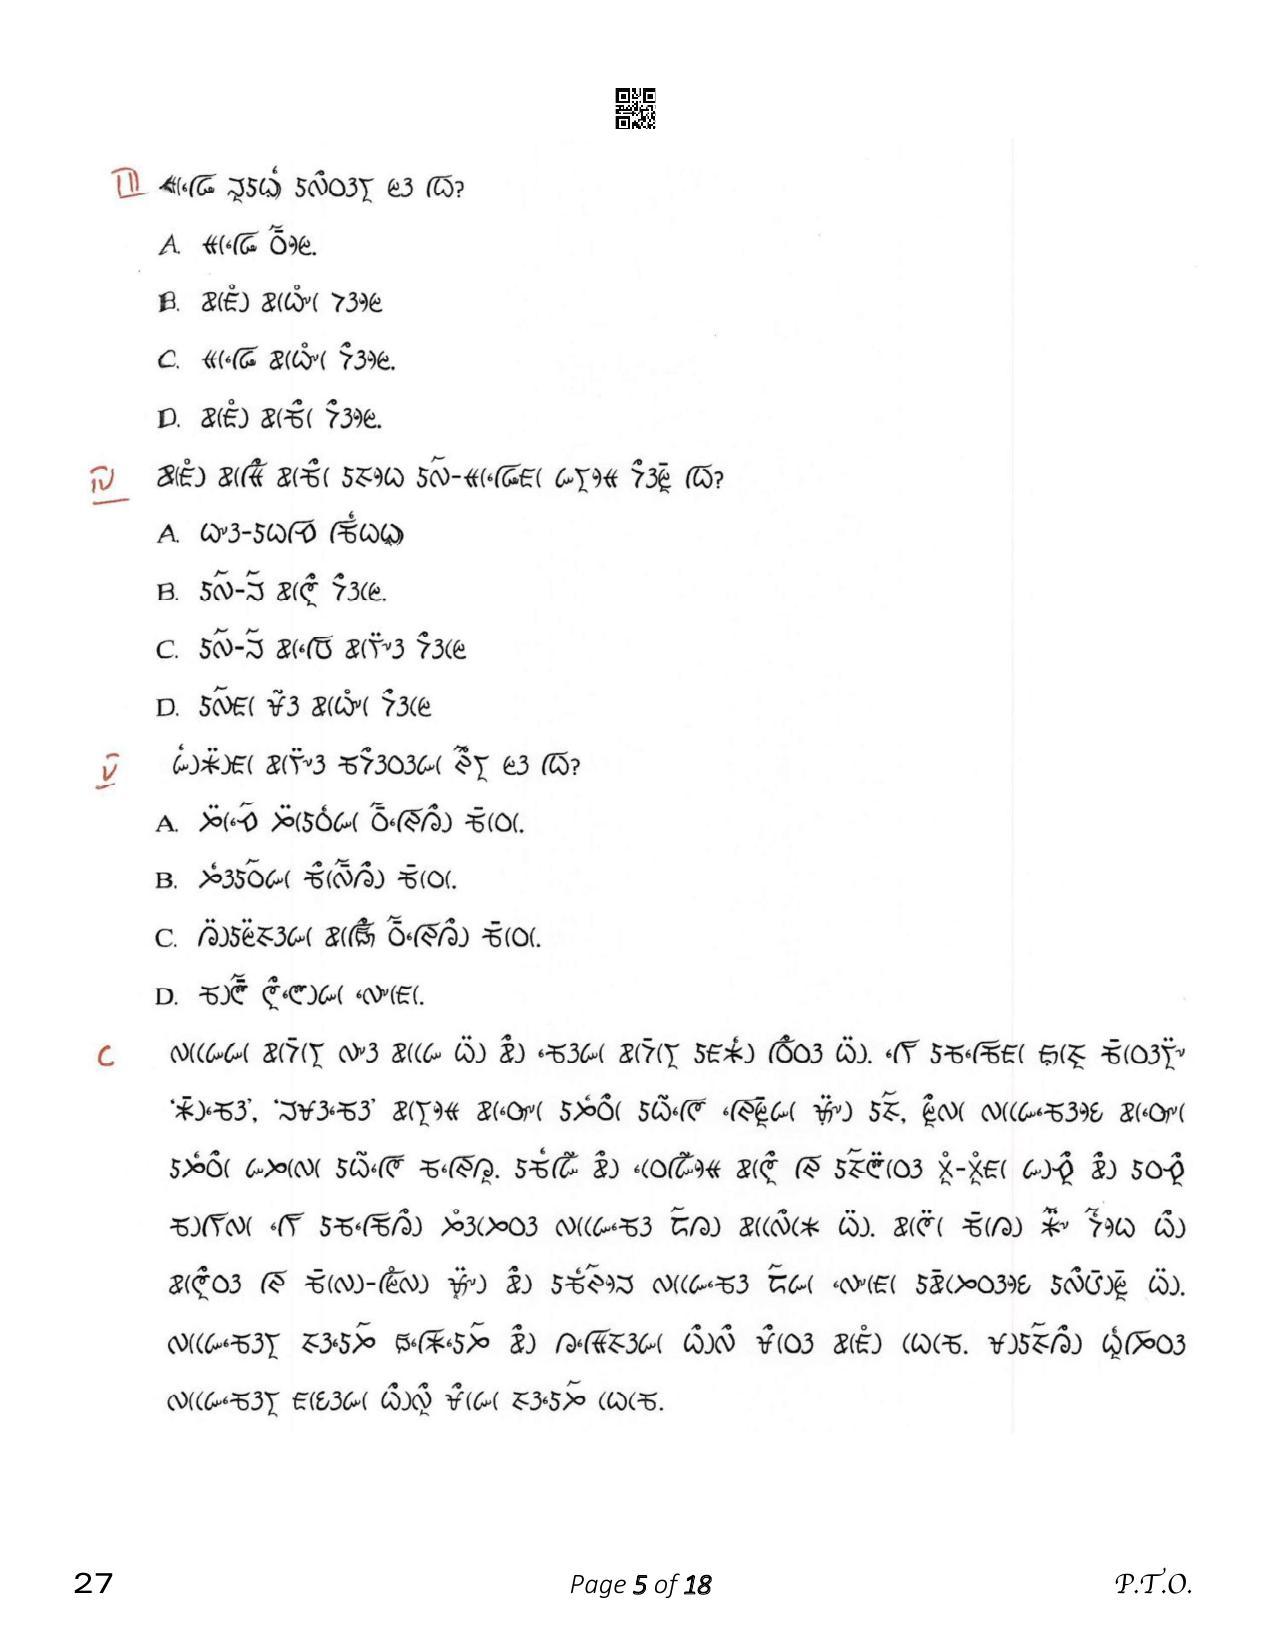 CBSE Class 10 27_Lepcha 2023 Question Paper - Page 5